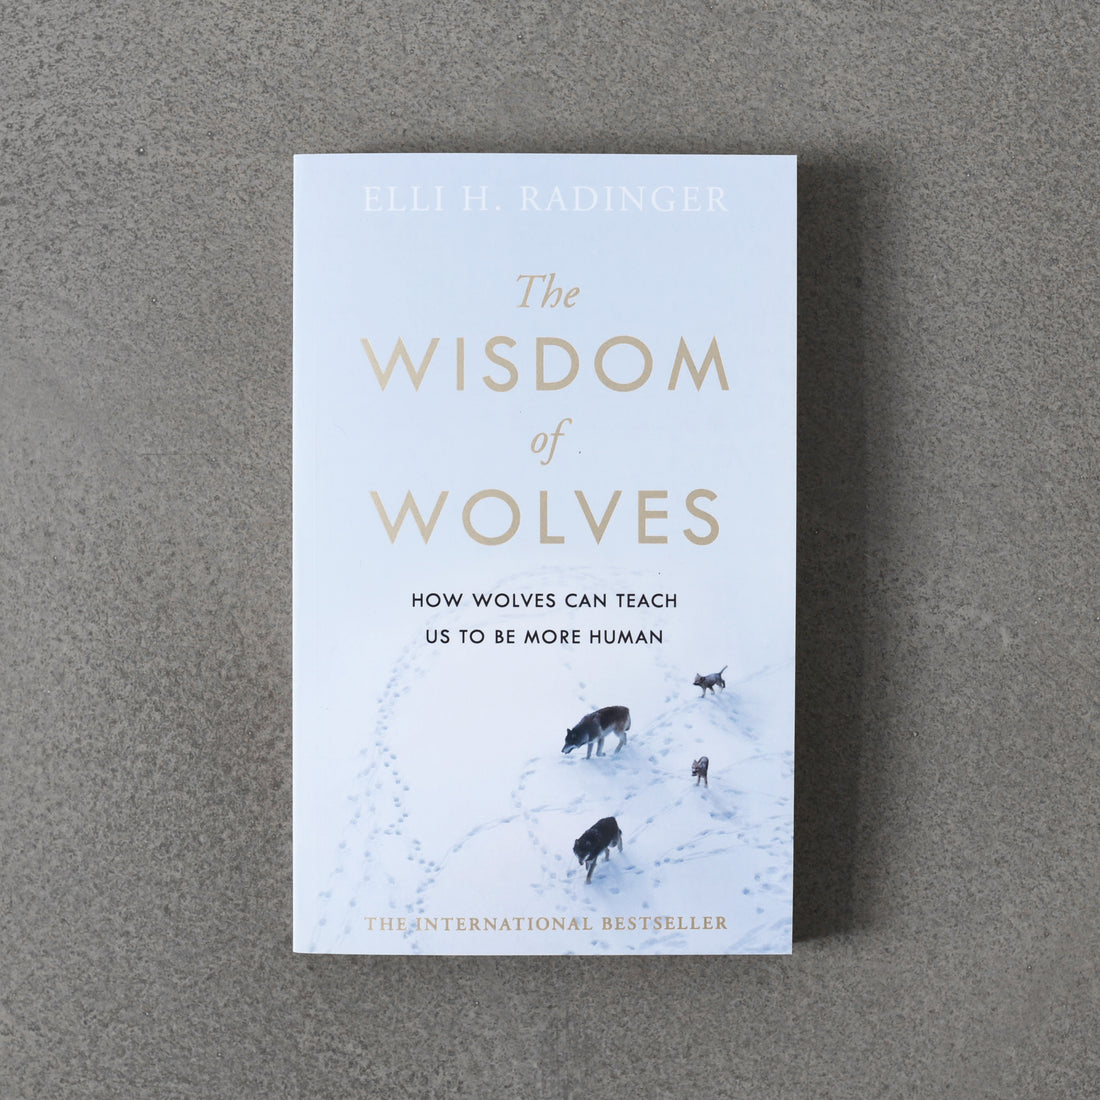 Wisdom of Wolves: How Wolves Can Teach Us to Be More Human - Elli H. Radinger